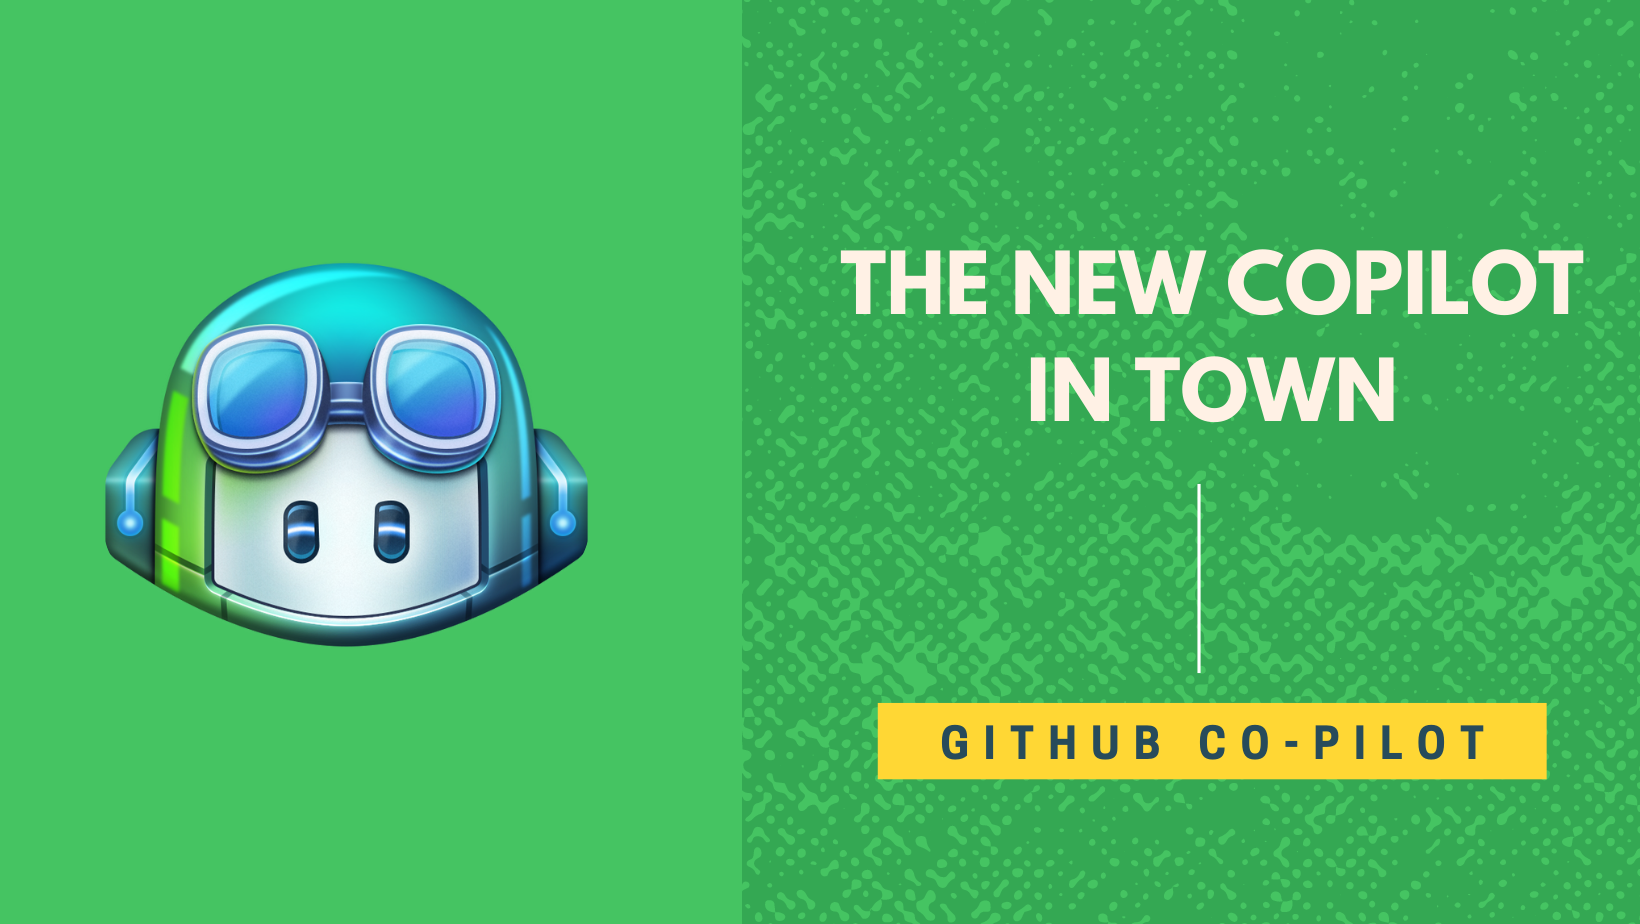 Cover Image for The New Co-Pilot In Town - (Github Co-Pilot)